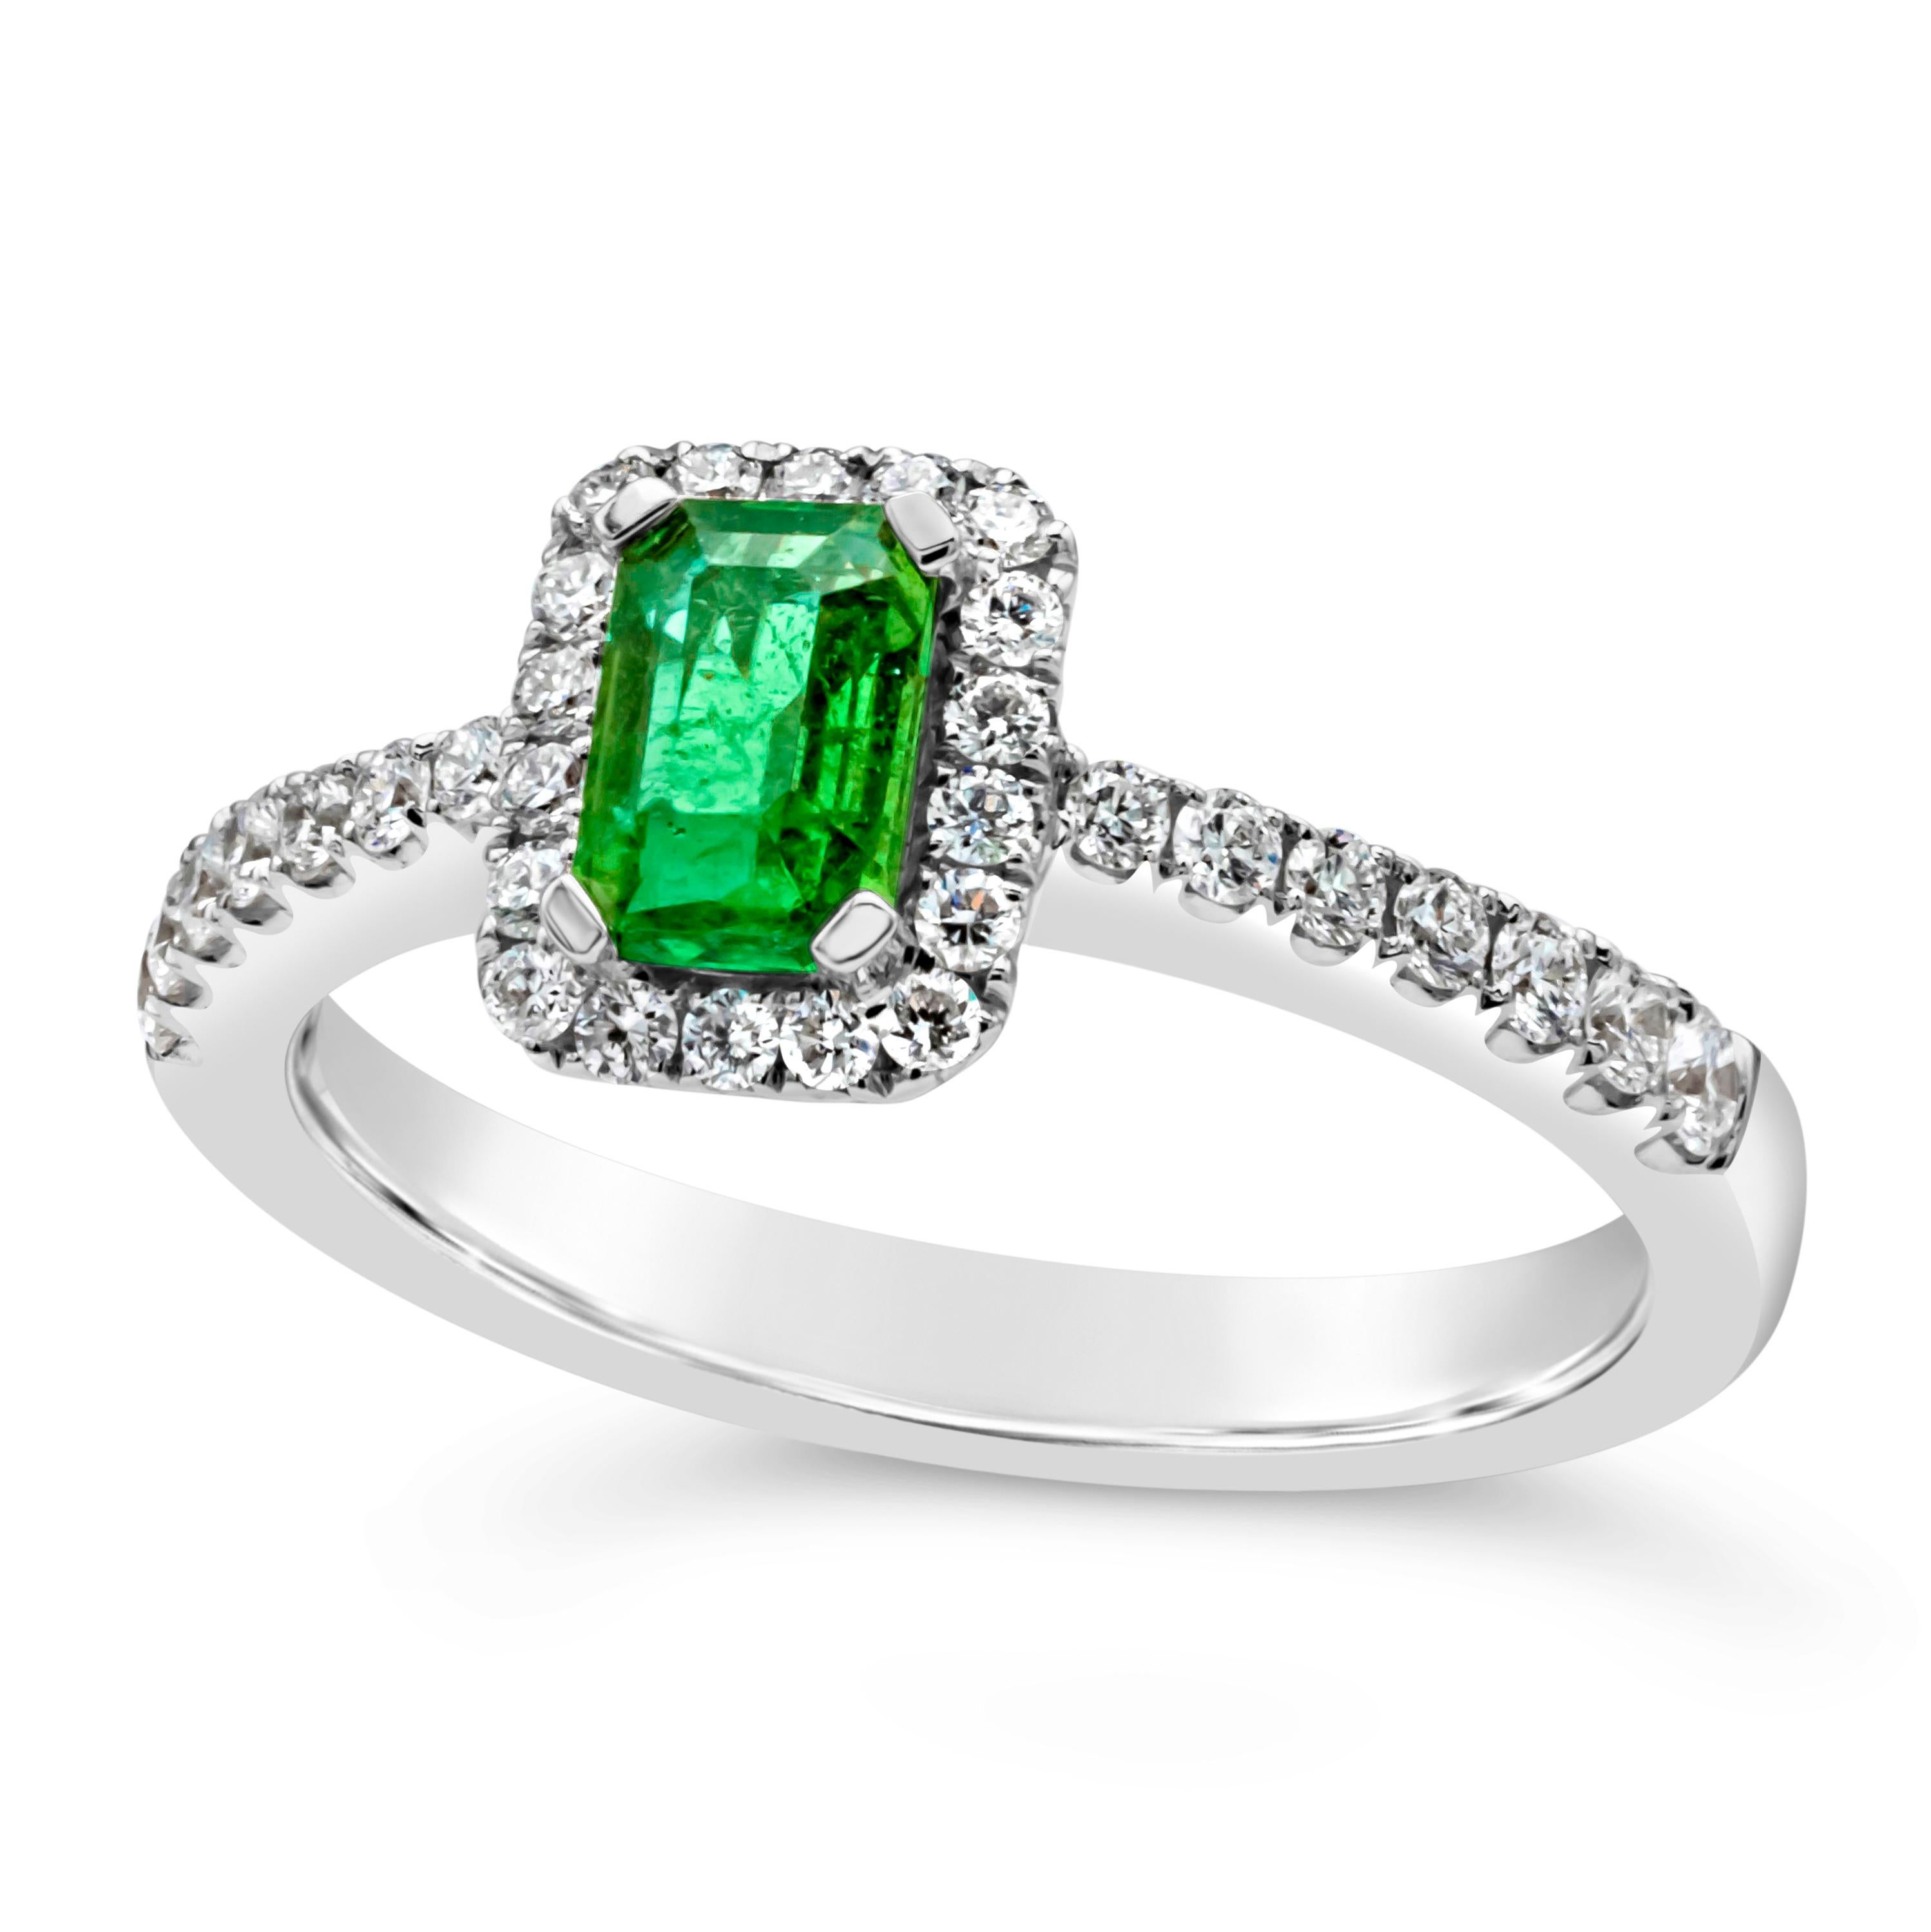 Contemporary 0.49 Carats Total Emerald Cut Green Emerald & Diamond Halo Engagement Ring For Sale